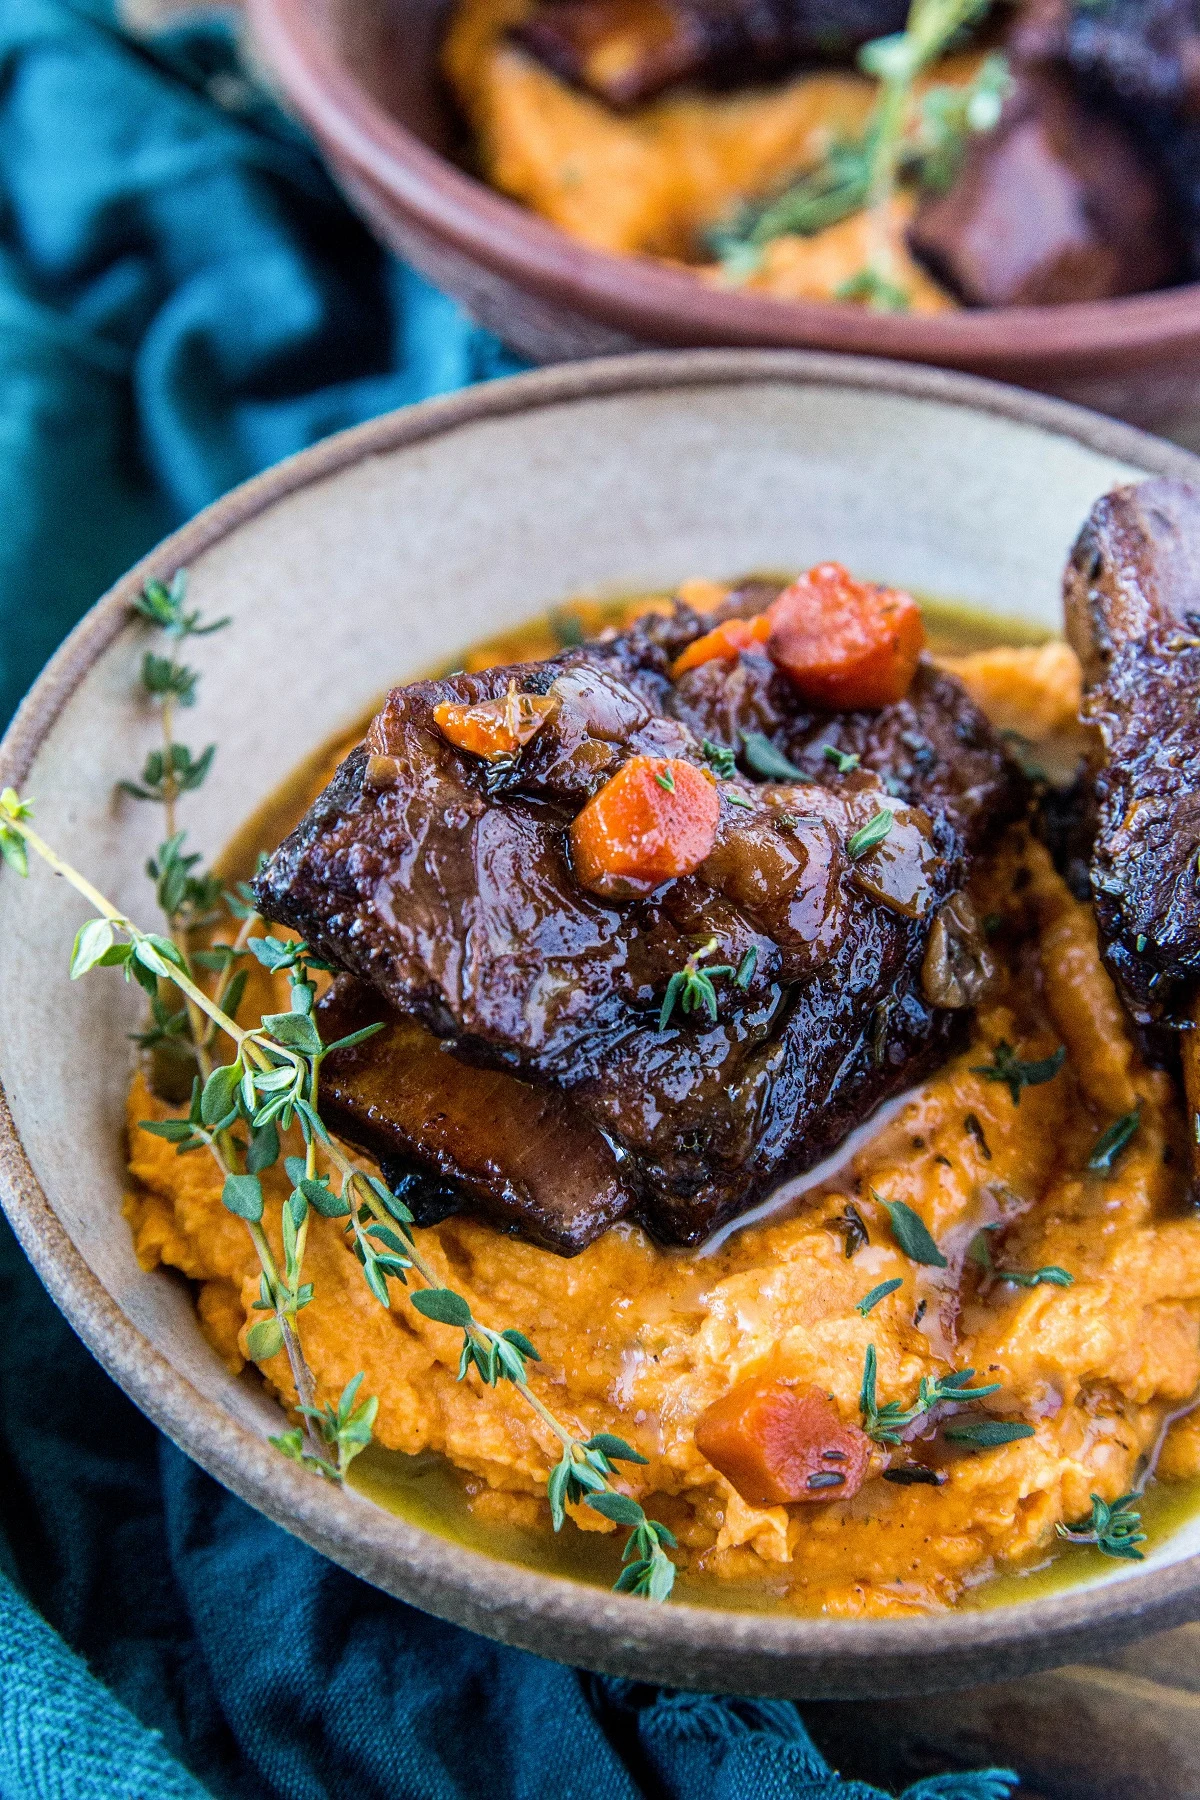 Instant Pot Short Ribs made paleo-friendly with tart cherry juice. Serve them atop mashed sweet potatoes for a delicious complete meal. | TheRoastedRoot.com #grainfree #glutenfree #healthyrecipe